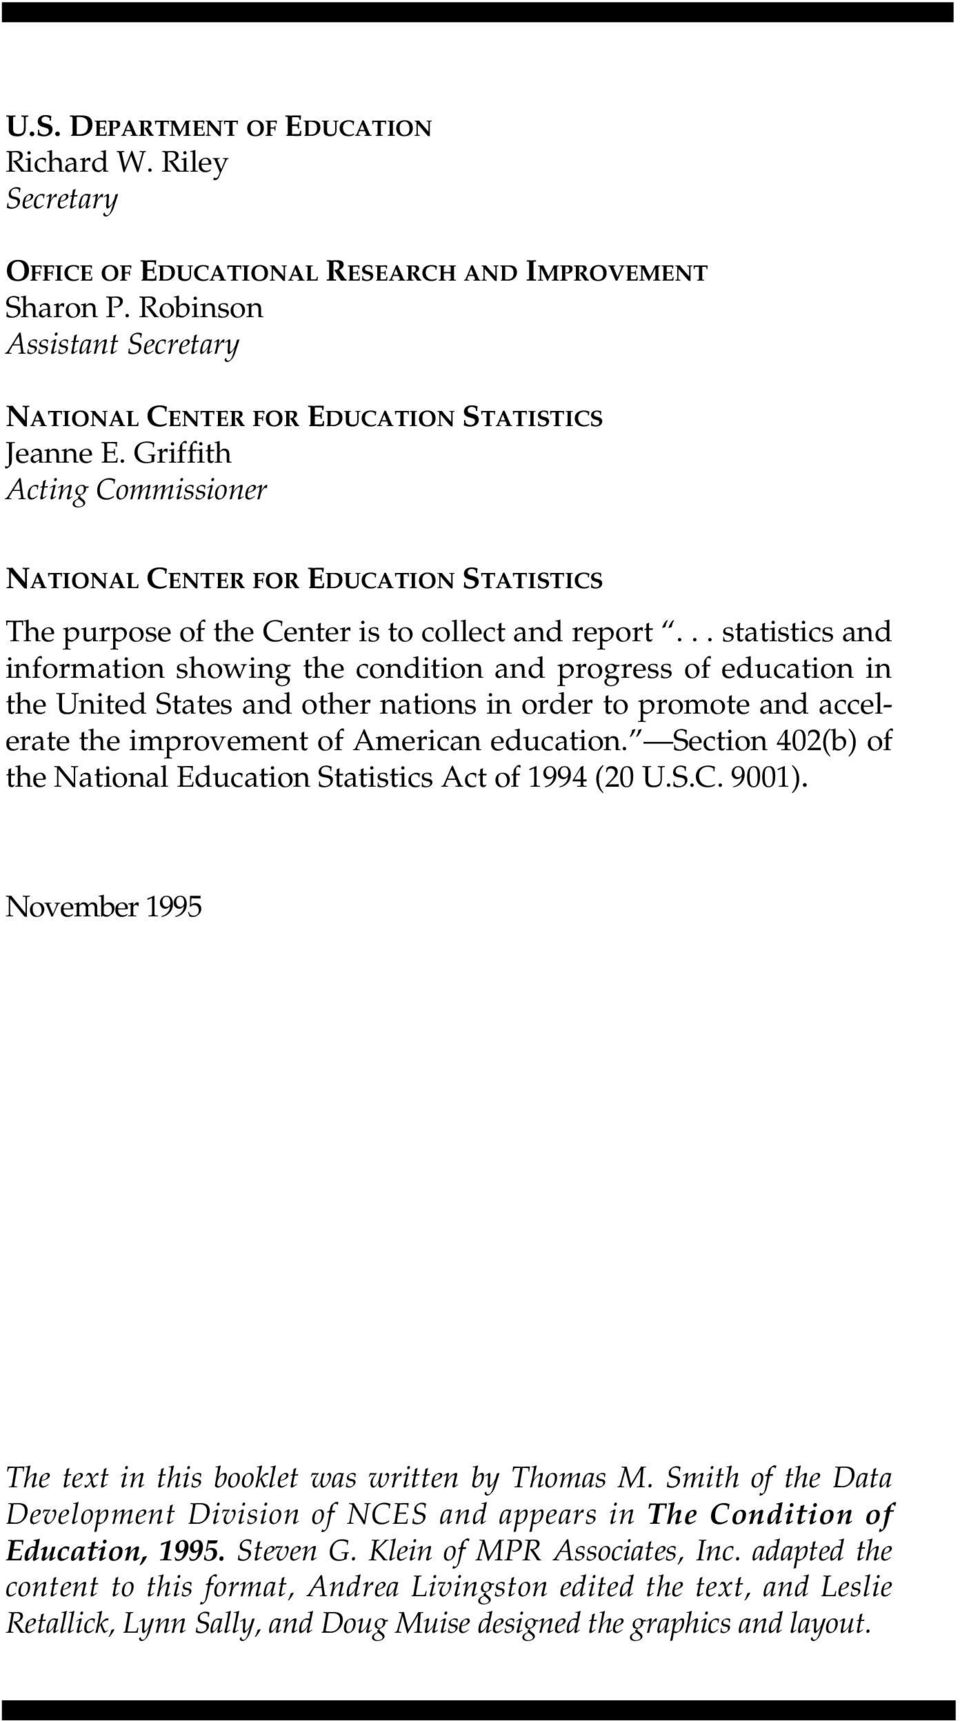 .. statistics and information showing the condition and progress of education in the United States and other nations in order to promote and accelerate the improvement of American education.